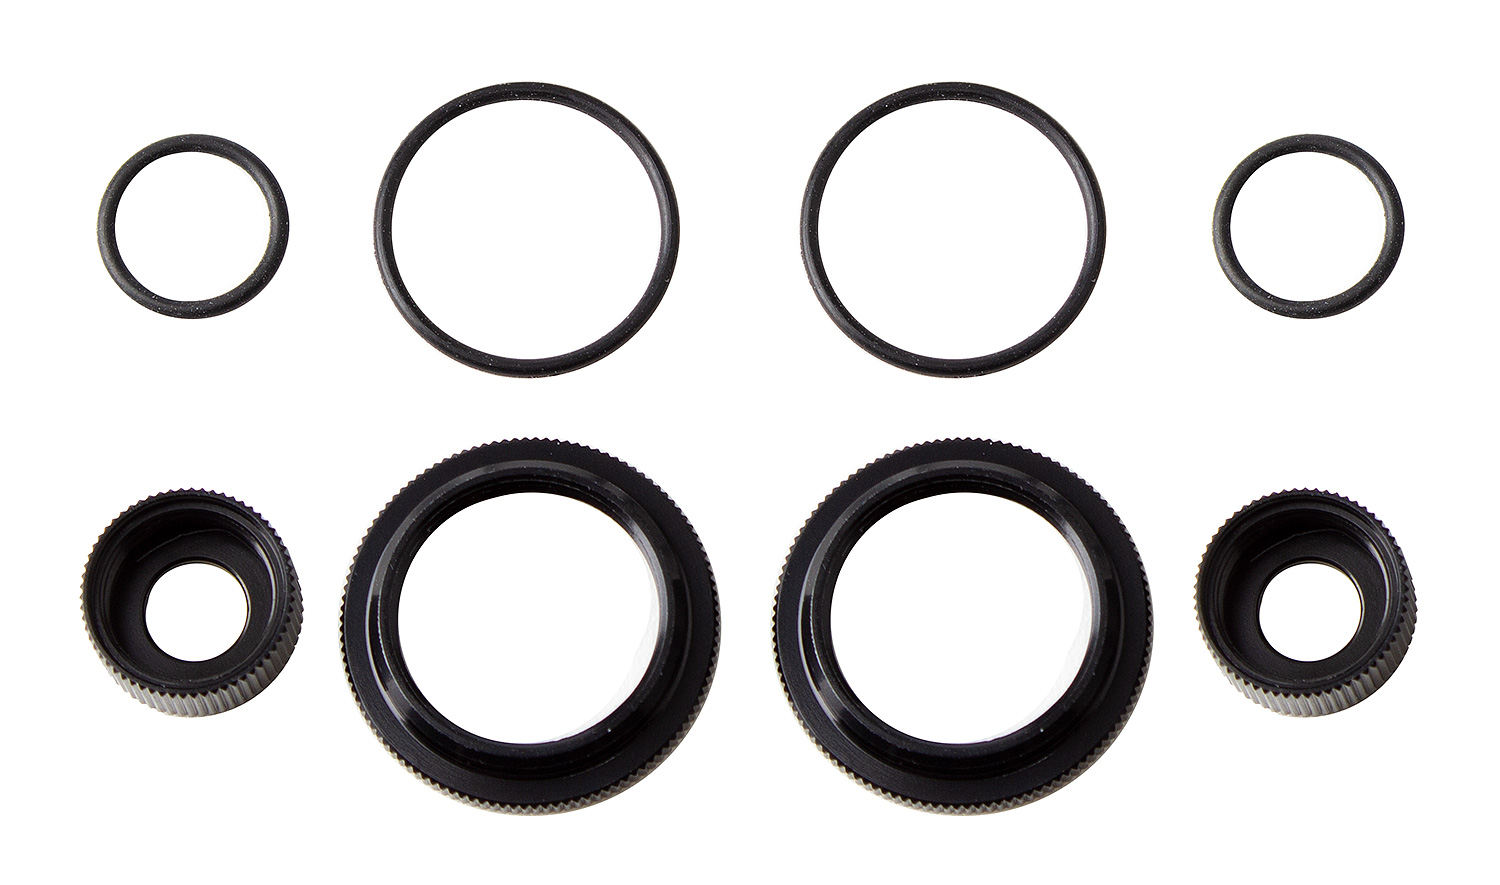 12mm Shock Collar and Seal Retainer Set, black